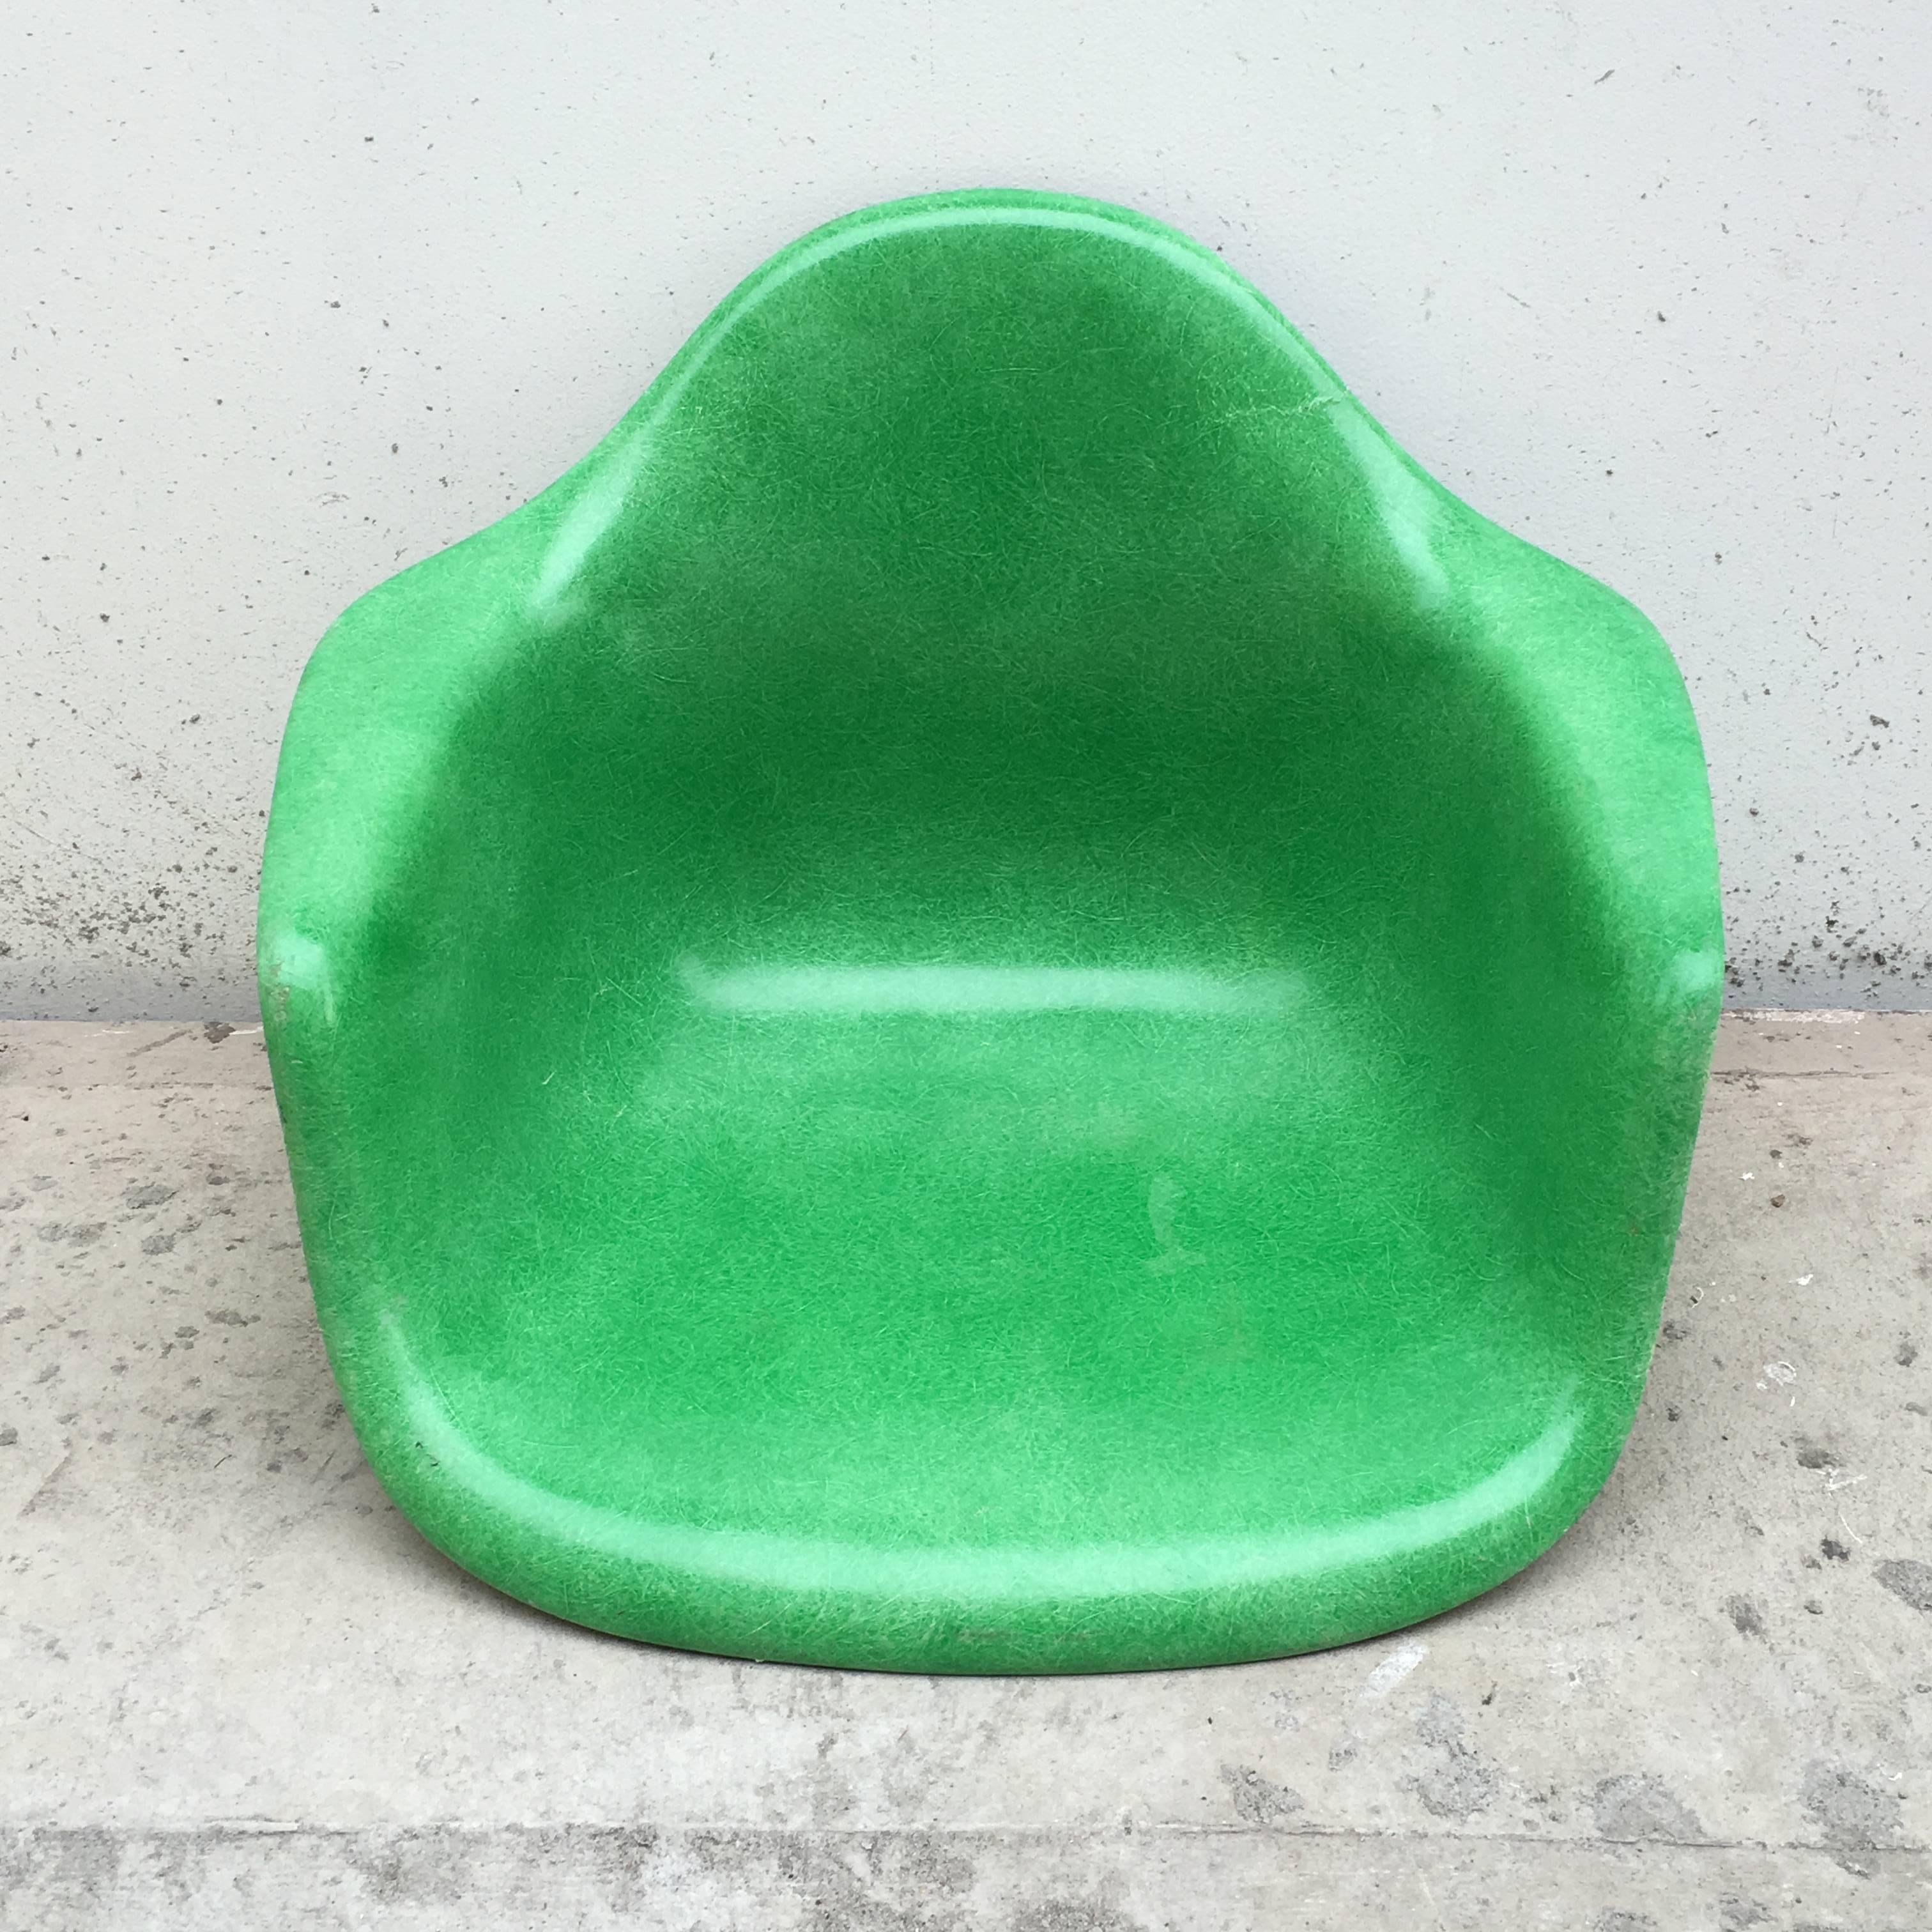 Herman Miller Eames fiberglass chair in Kelly Green. Hairline crack along top rim. Does not affect structural integrity. Lovely bold and extremely rare color. Available on standard base, Eiffel base, dowel base, or rocker base.